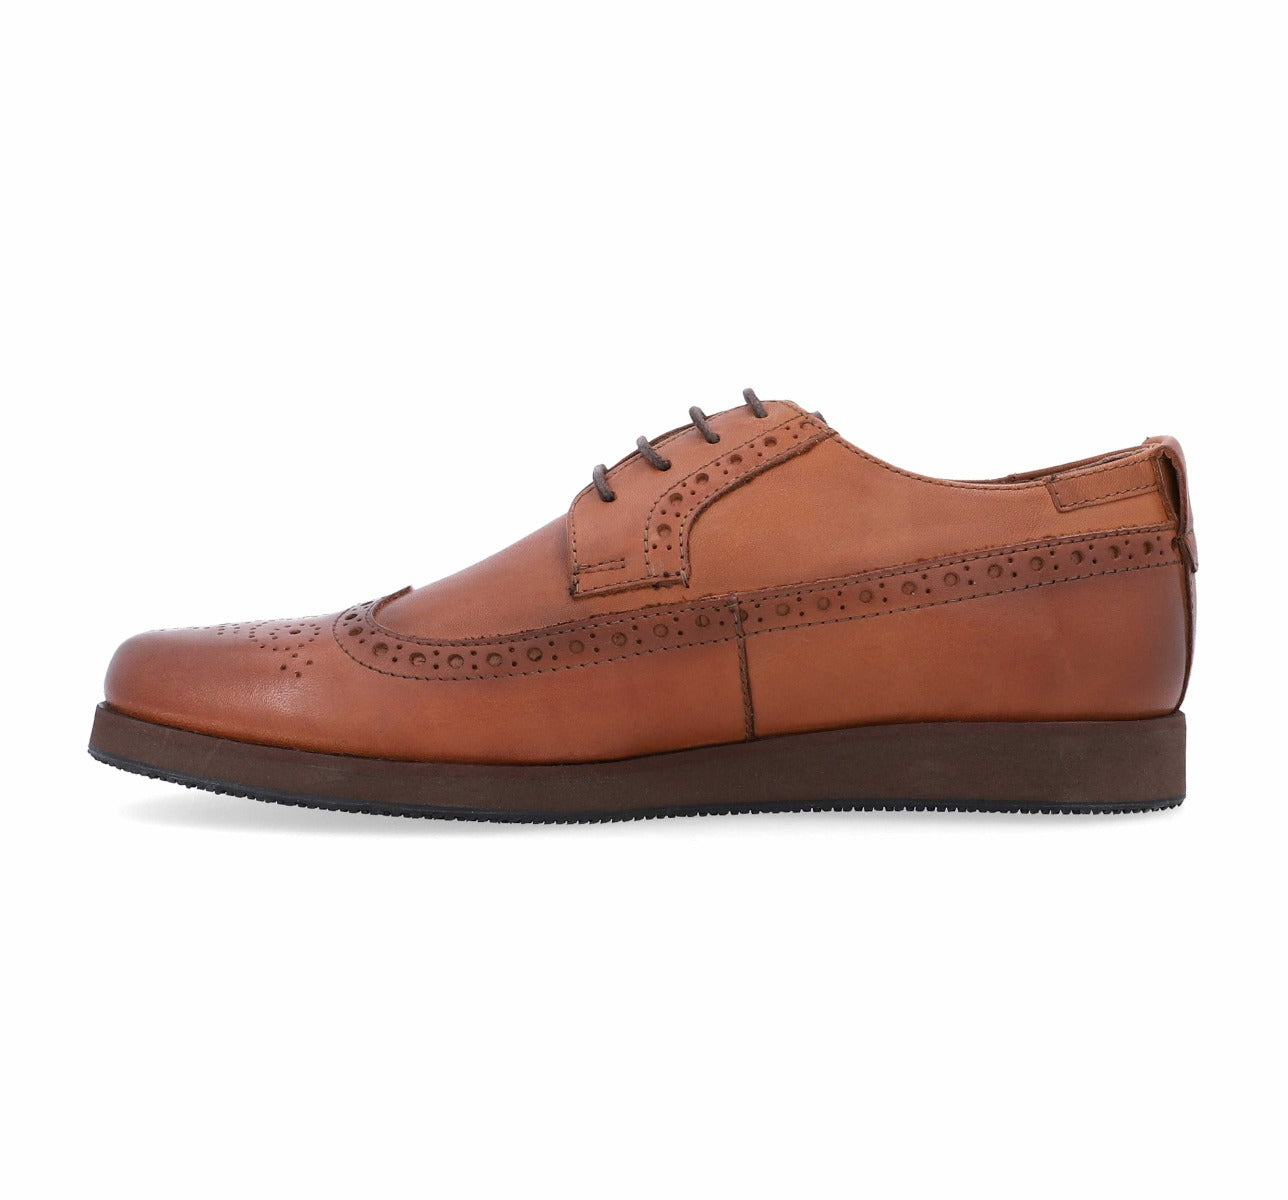 Barefoot Brown Oxford Lace Up For Men 1004